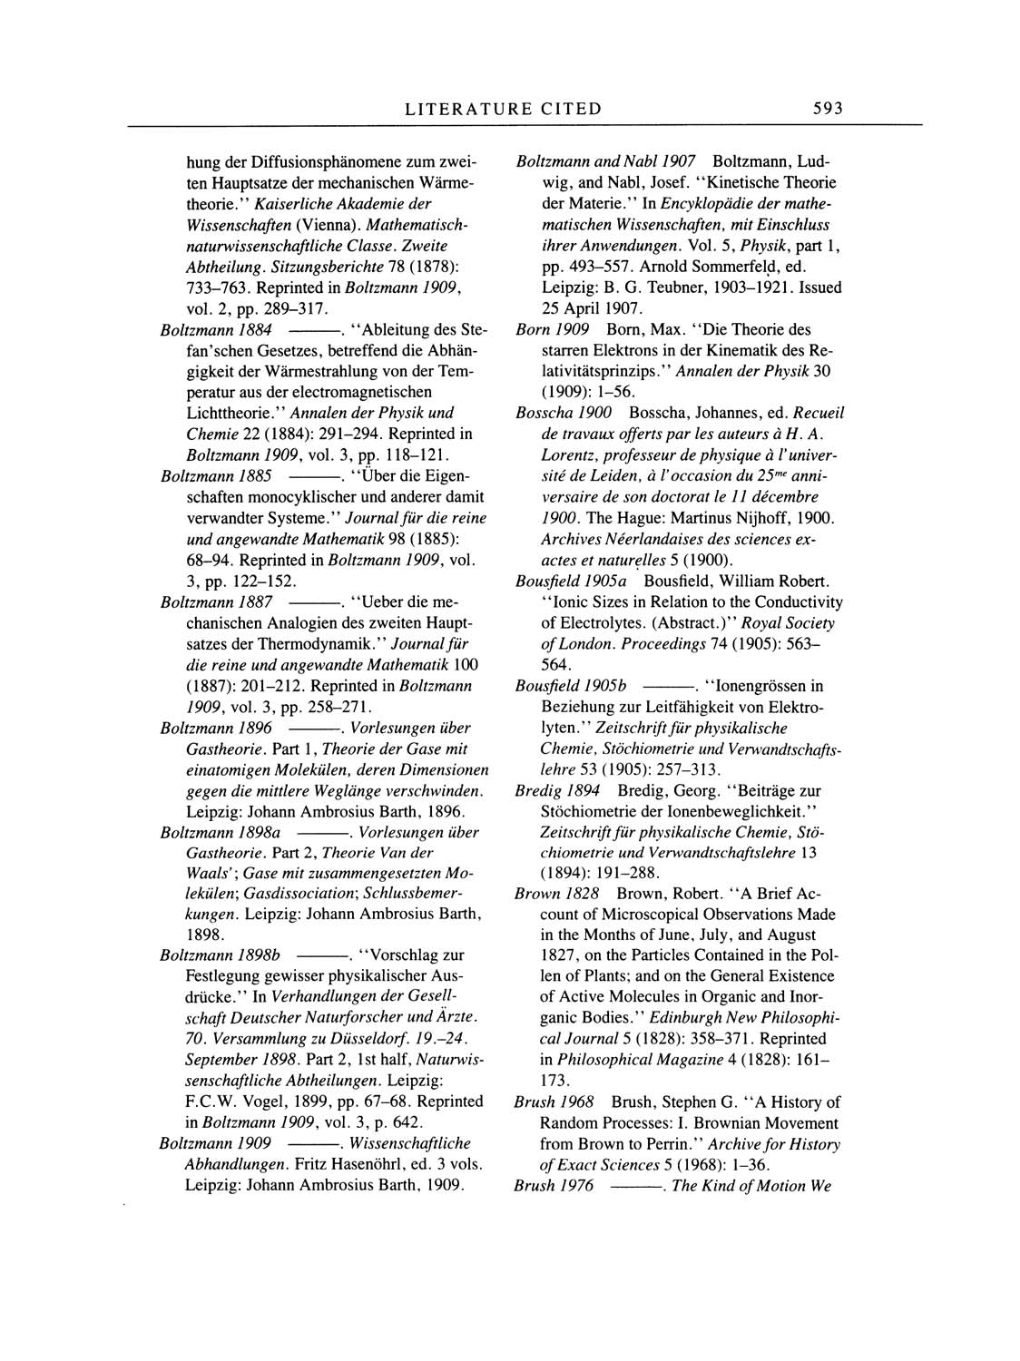 Volume 2: The Swiss Years: Writings, 1900-1909 page 593